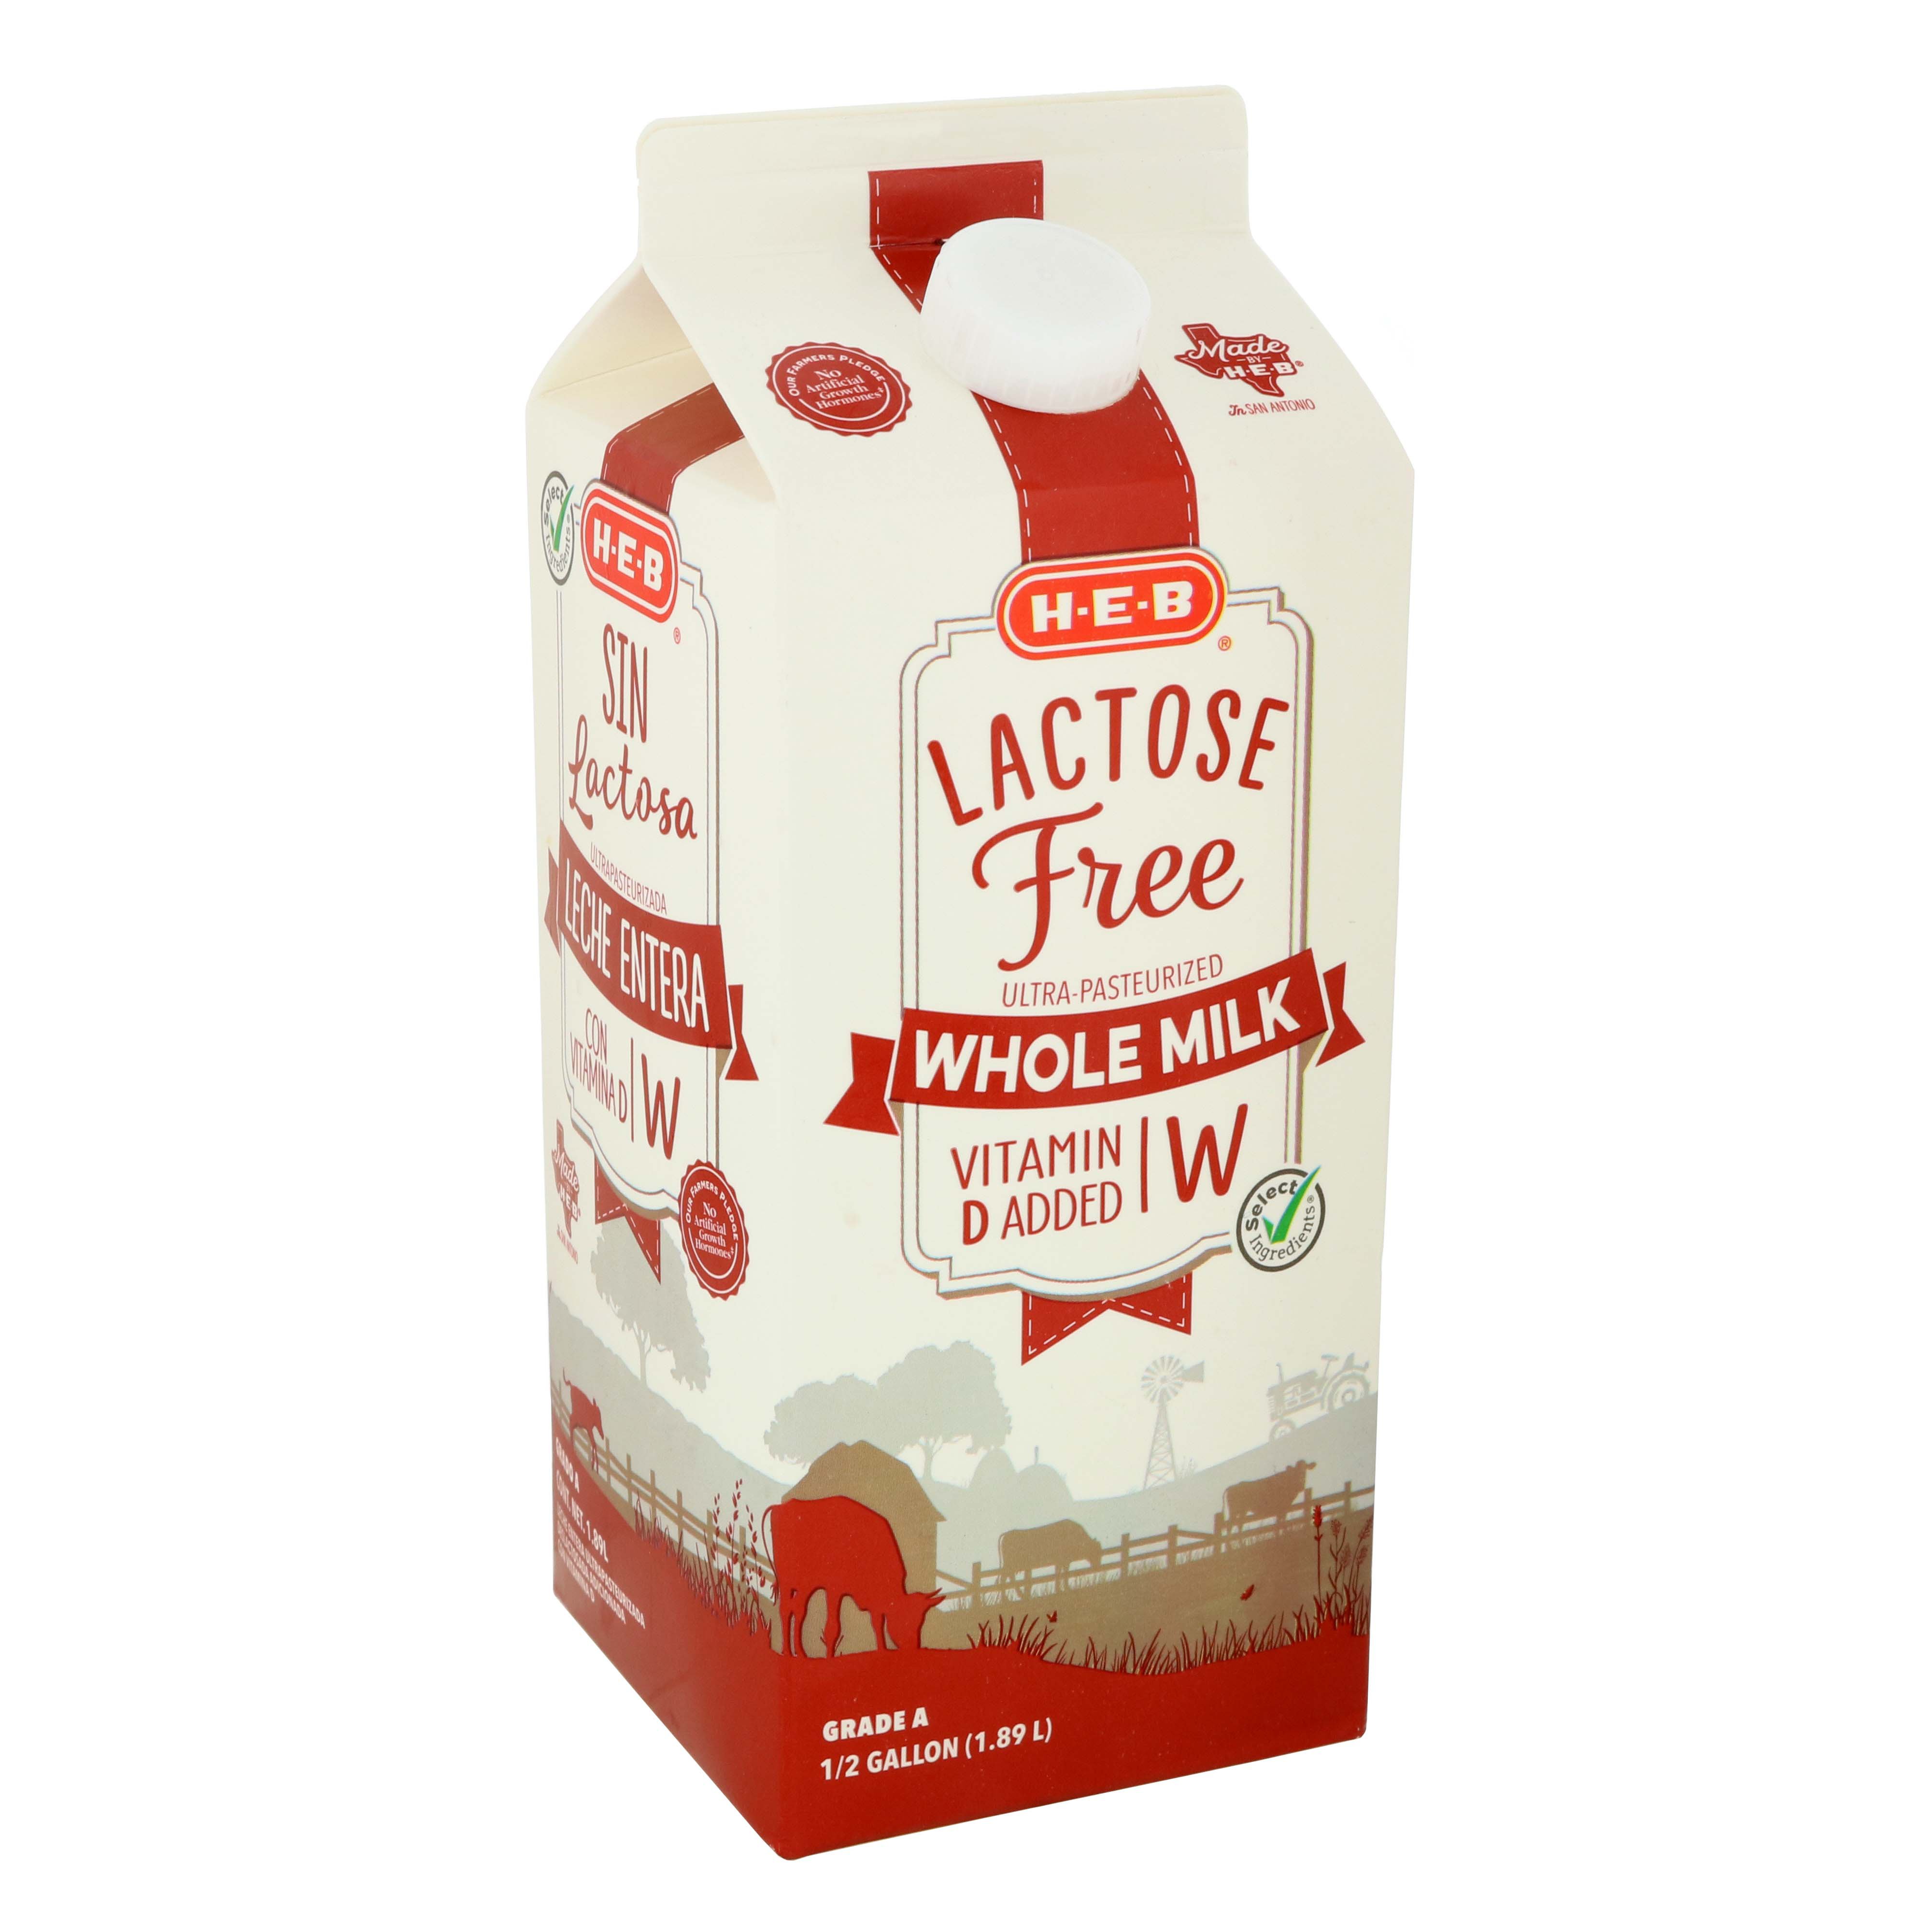 lactose free milk brands for babies